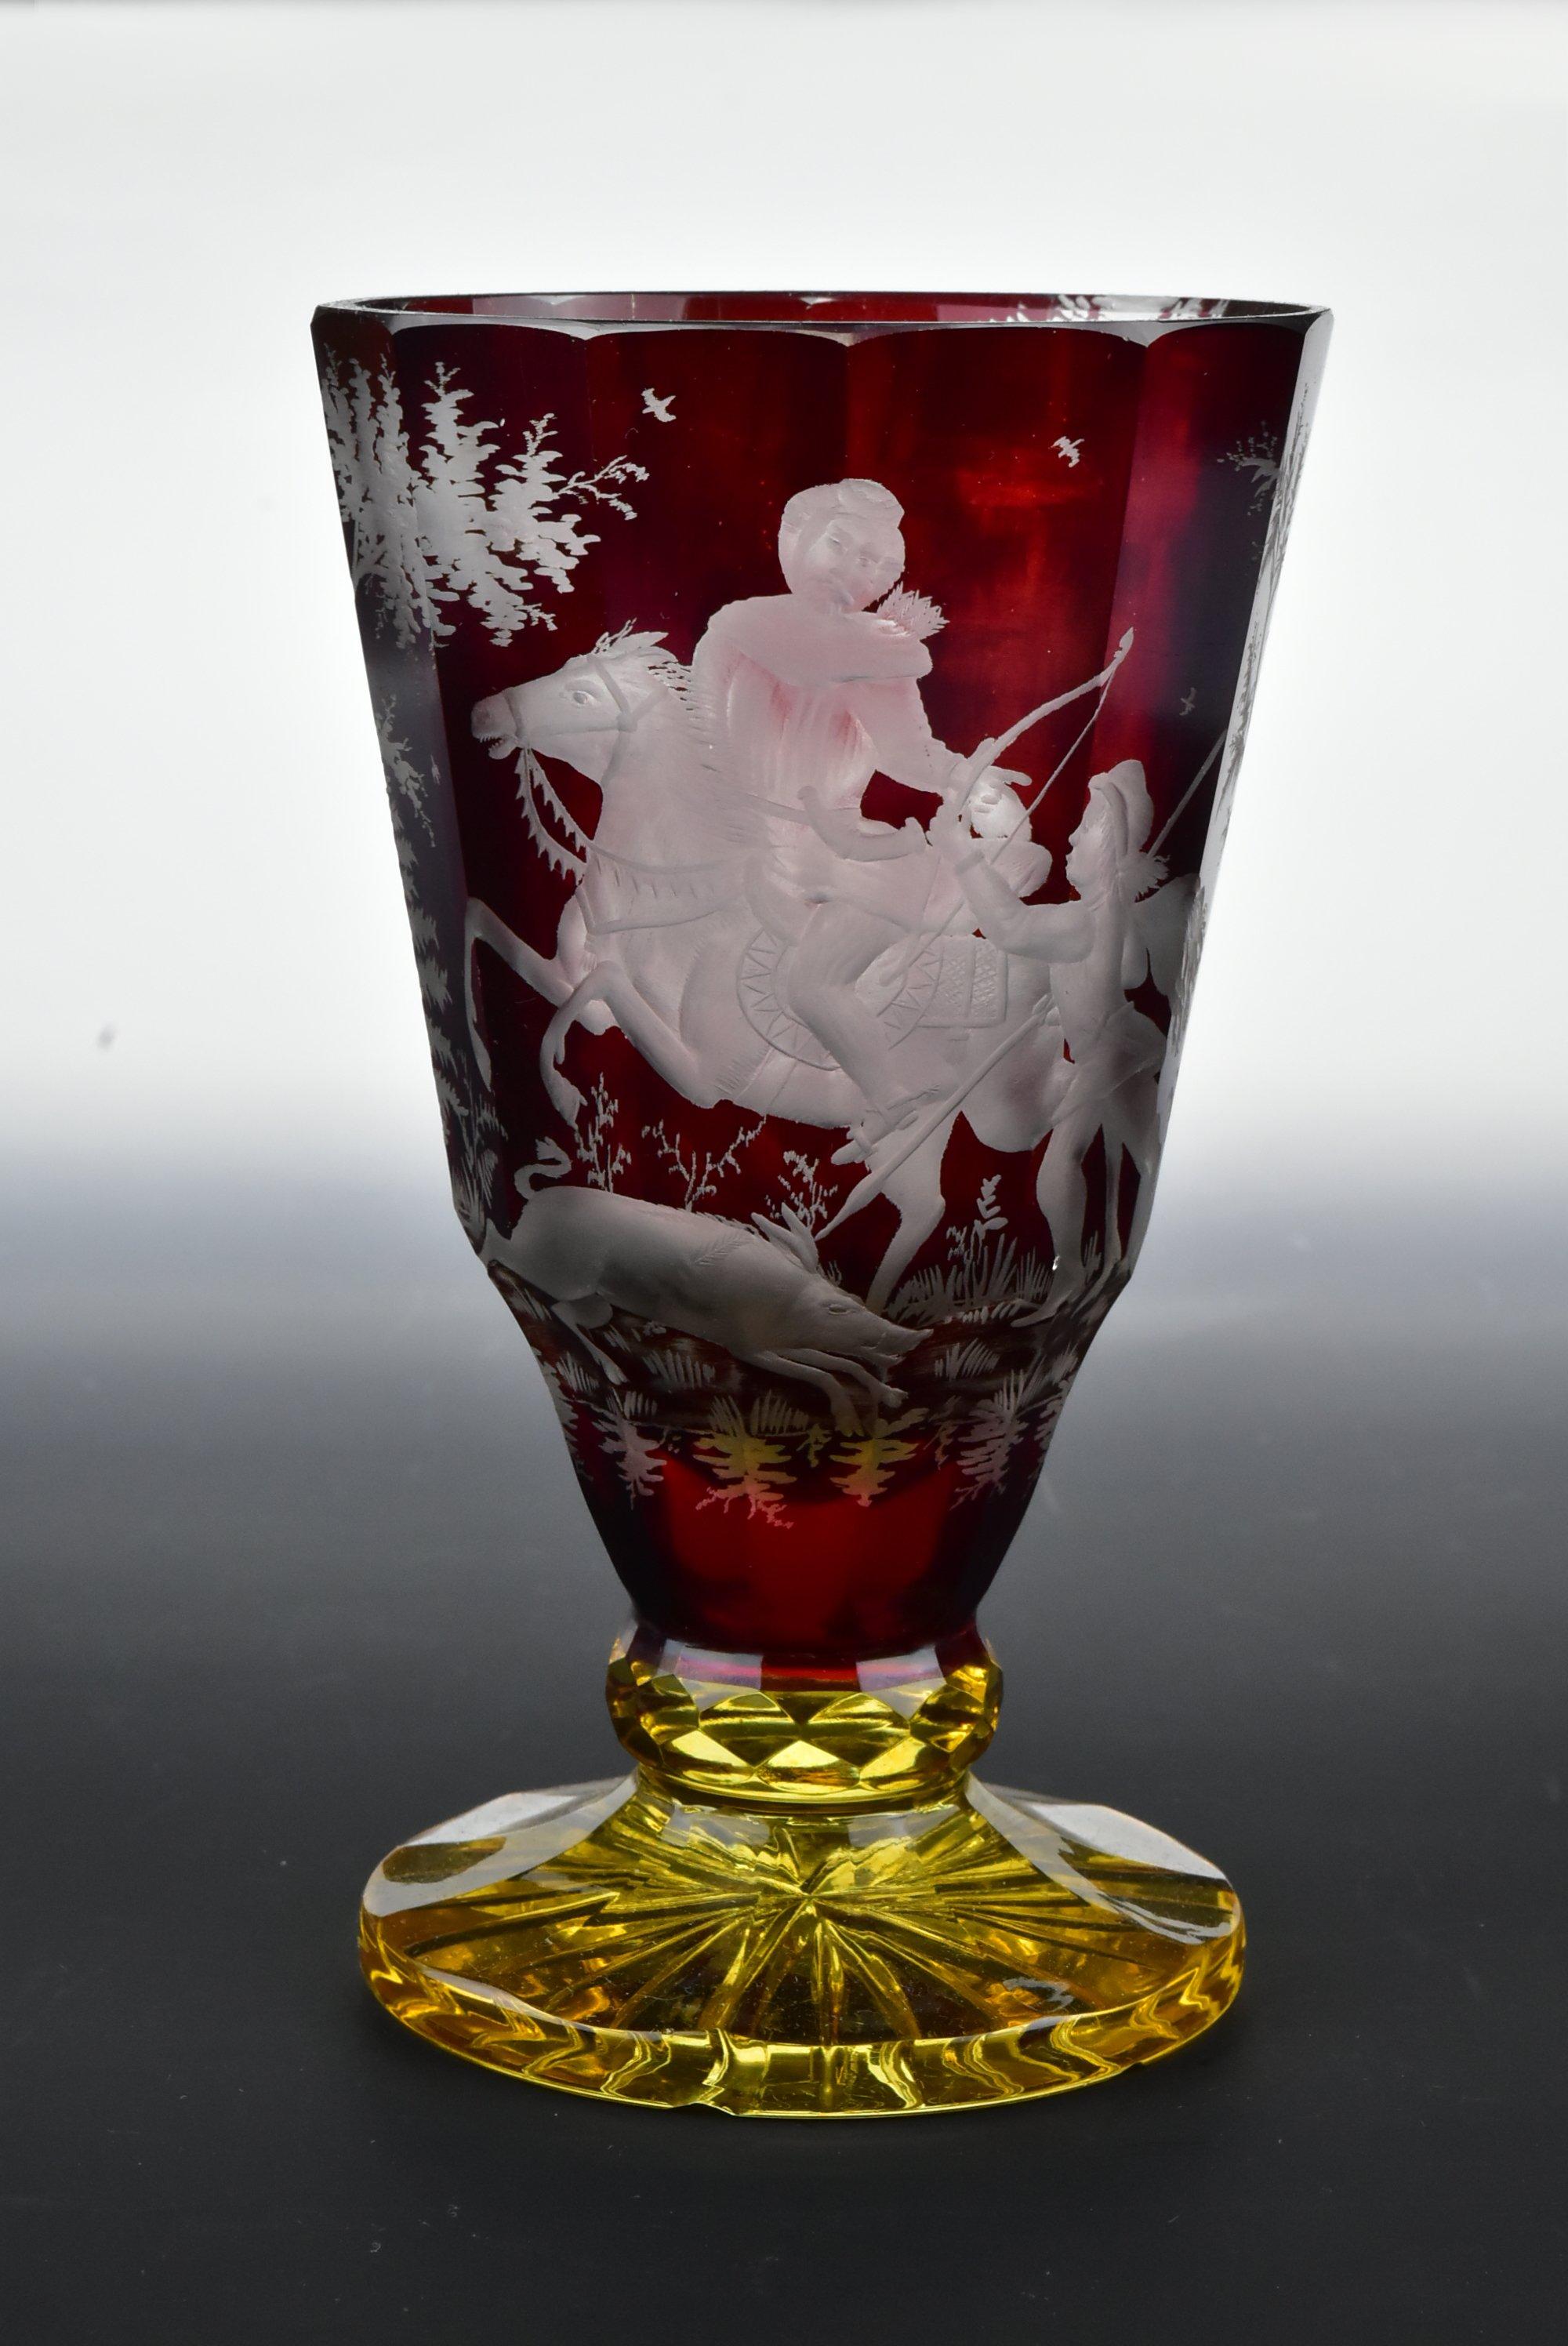 Description: Two colored Bohemian art glass spill vase with a hand engraved hunting scene.

Age: circa 1850 - 1875.

Size: Approximately 6 inches tall by 3 + 1/2 inches across the mouth by 3 + 1/8 inches across the foot rim.

Condition: Age